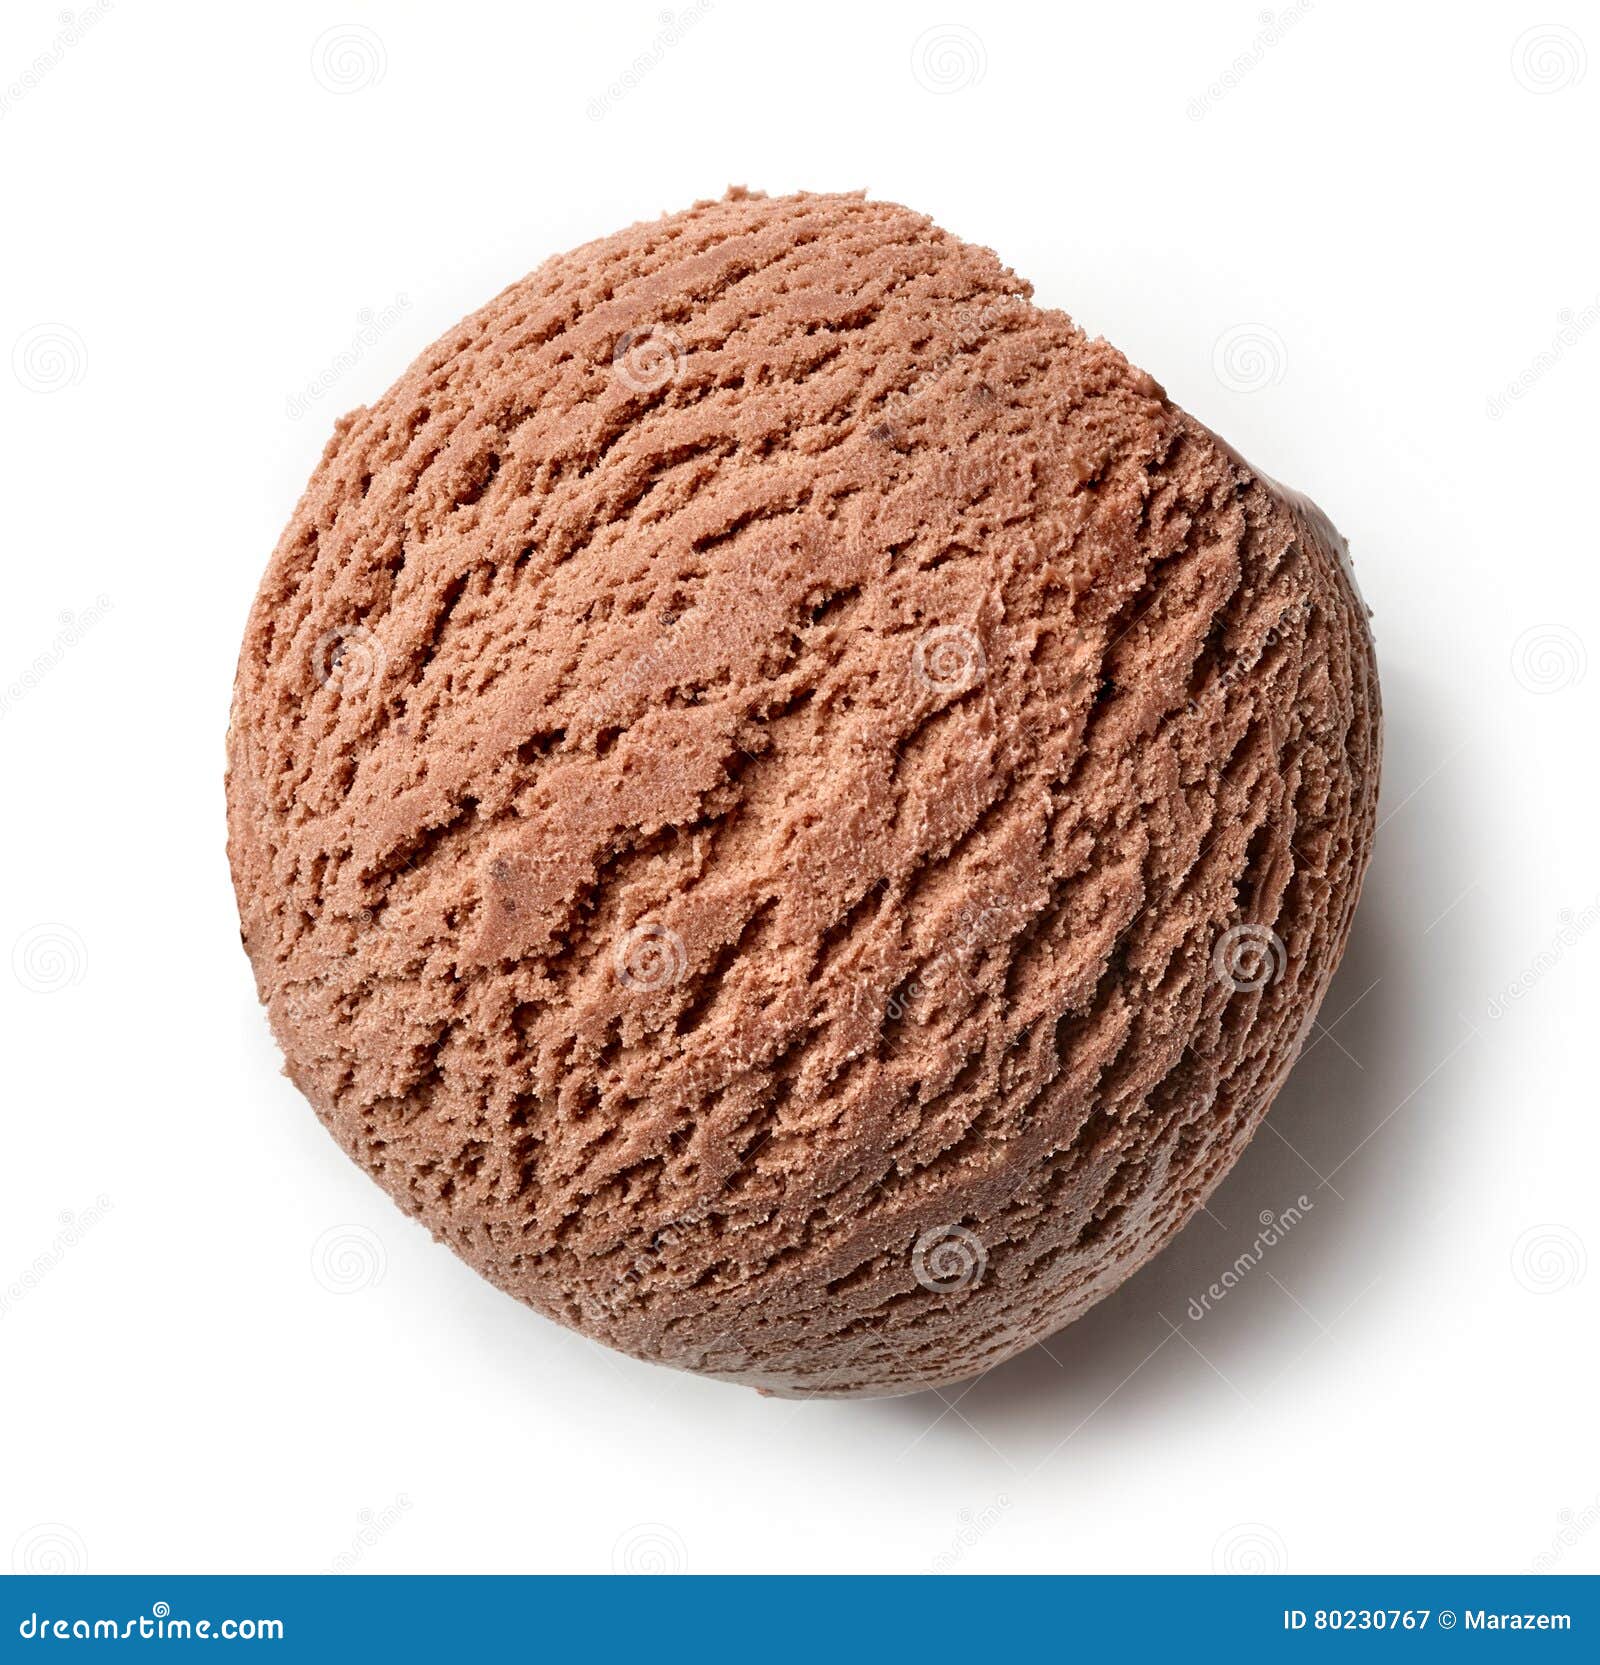 https://thumbs.dreamstime.com/z/chocolate-ice-cream-ball-isolated-white-background-top-view-80230767.jpg